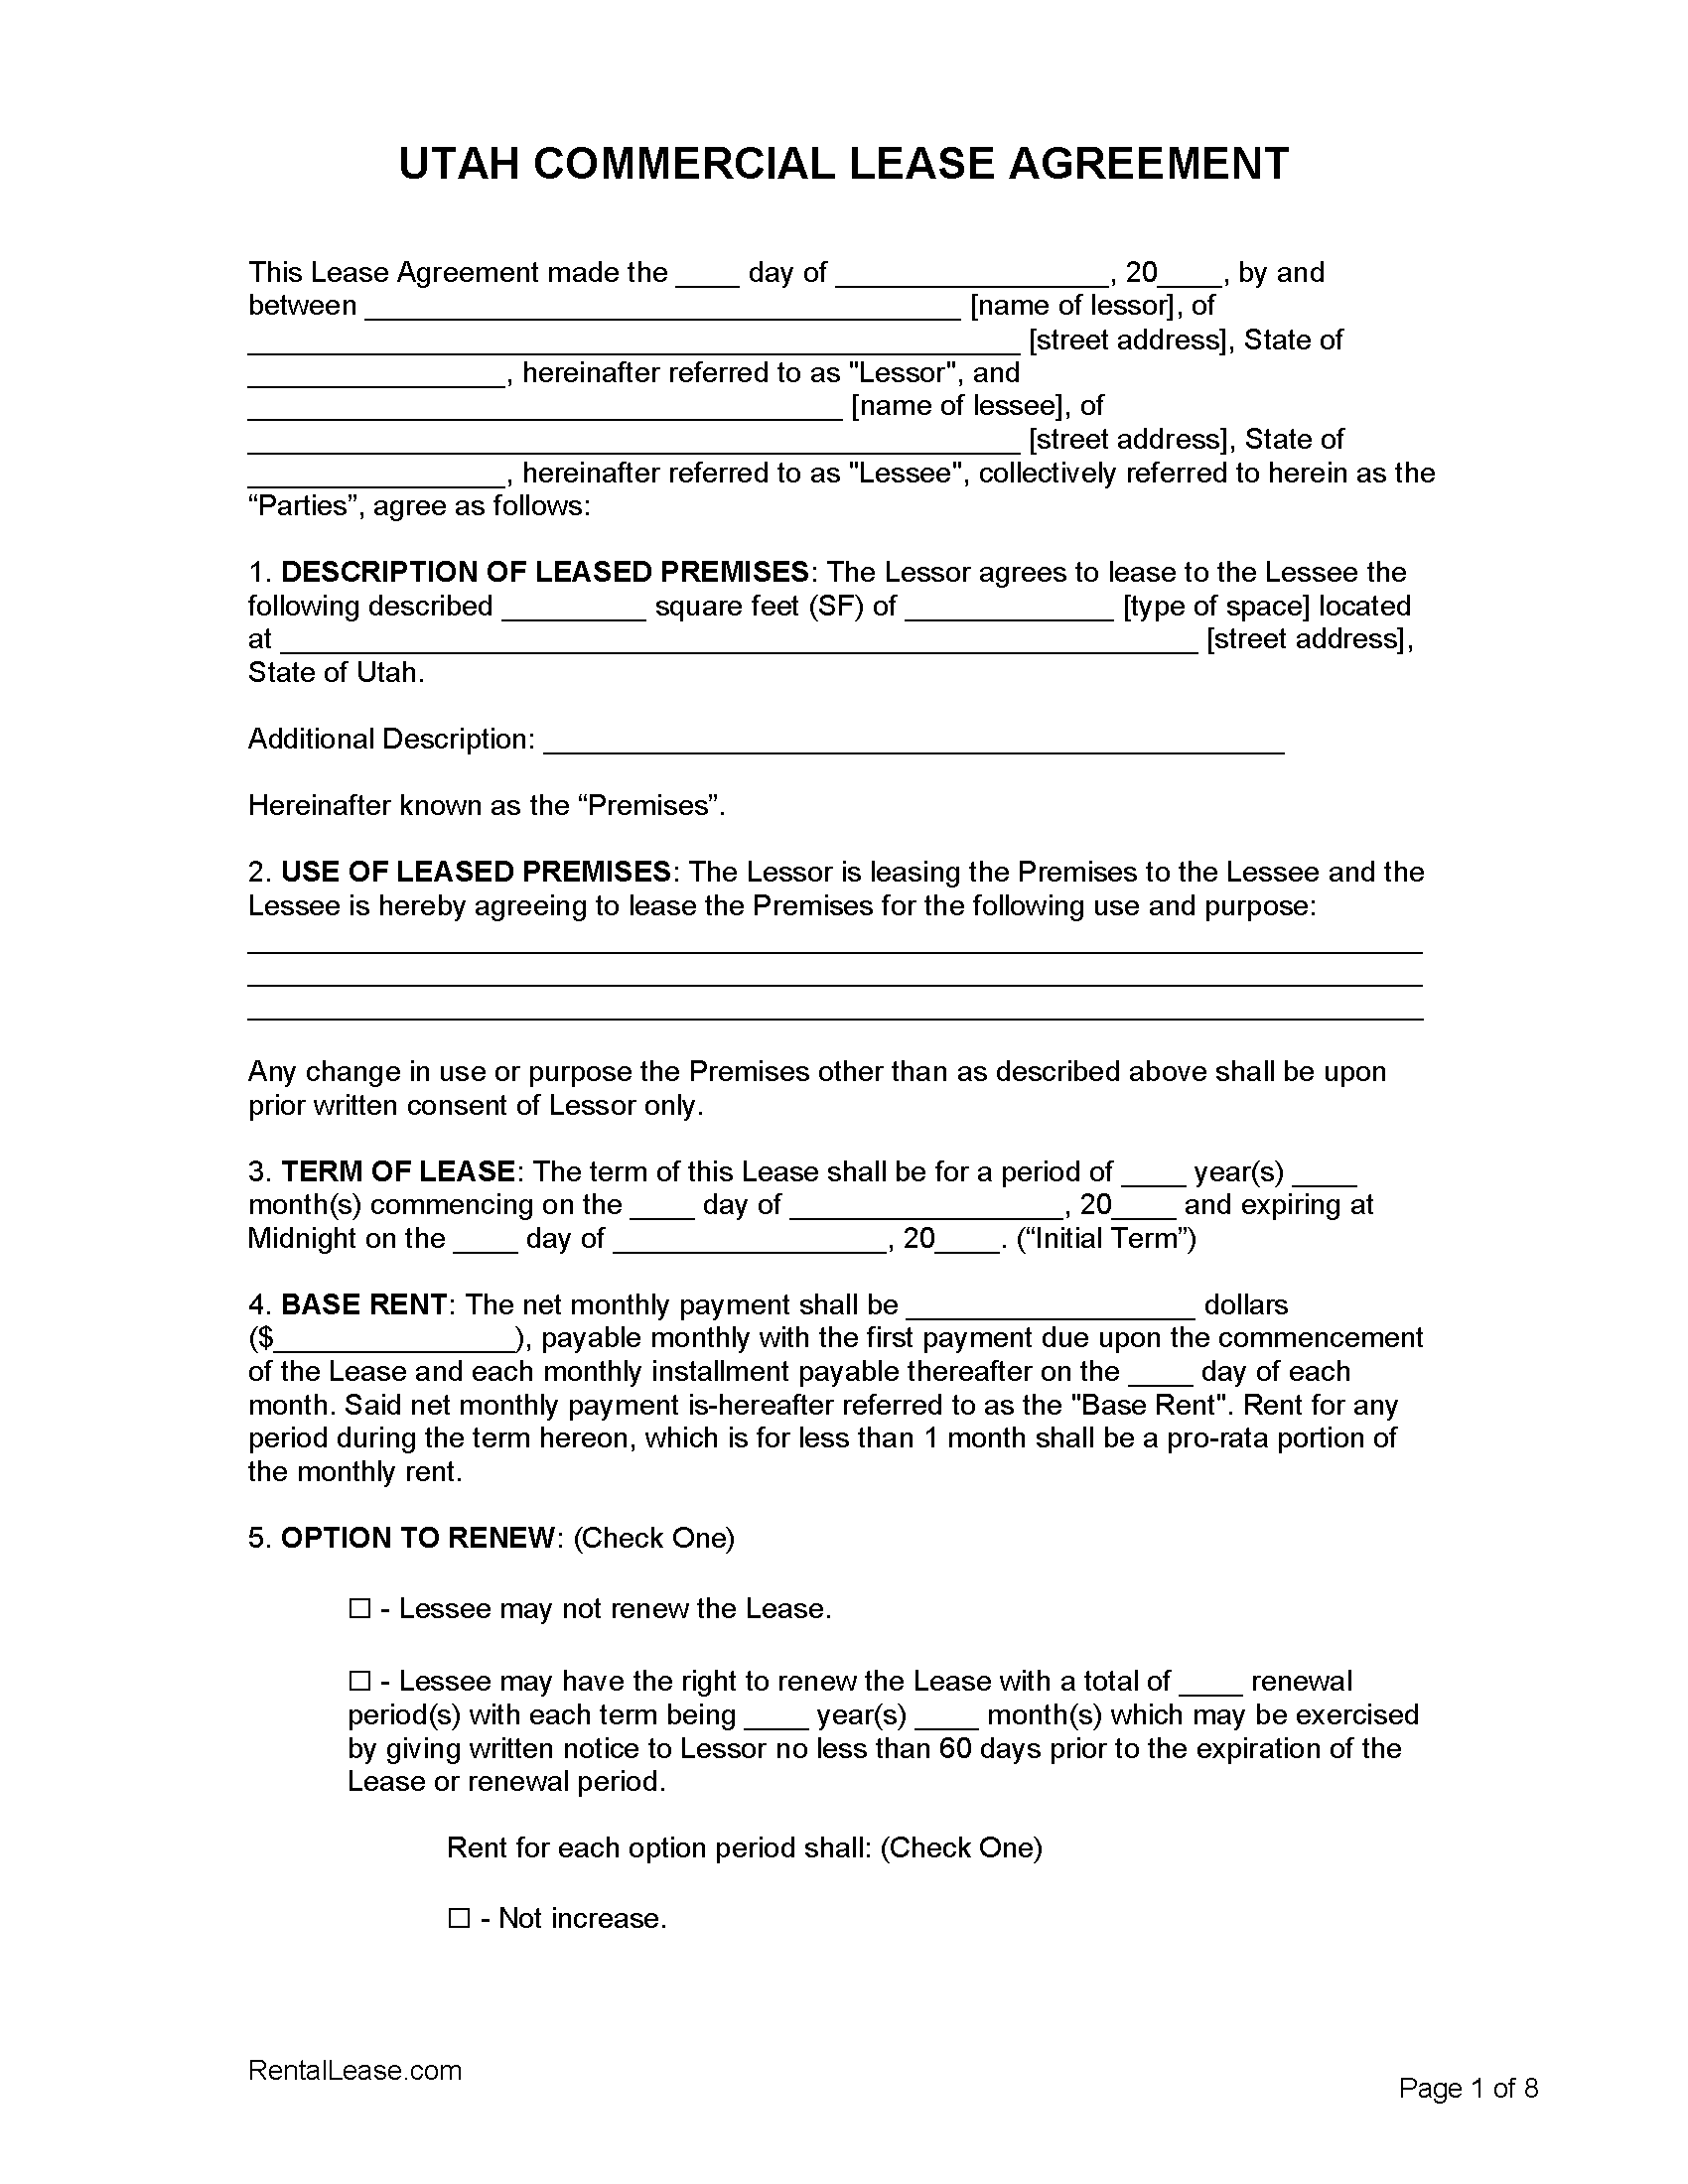 free-utah-commercial-lease-agreement-template-pdf-word